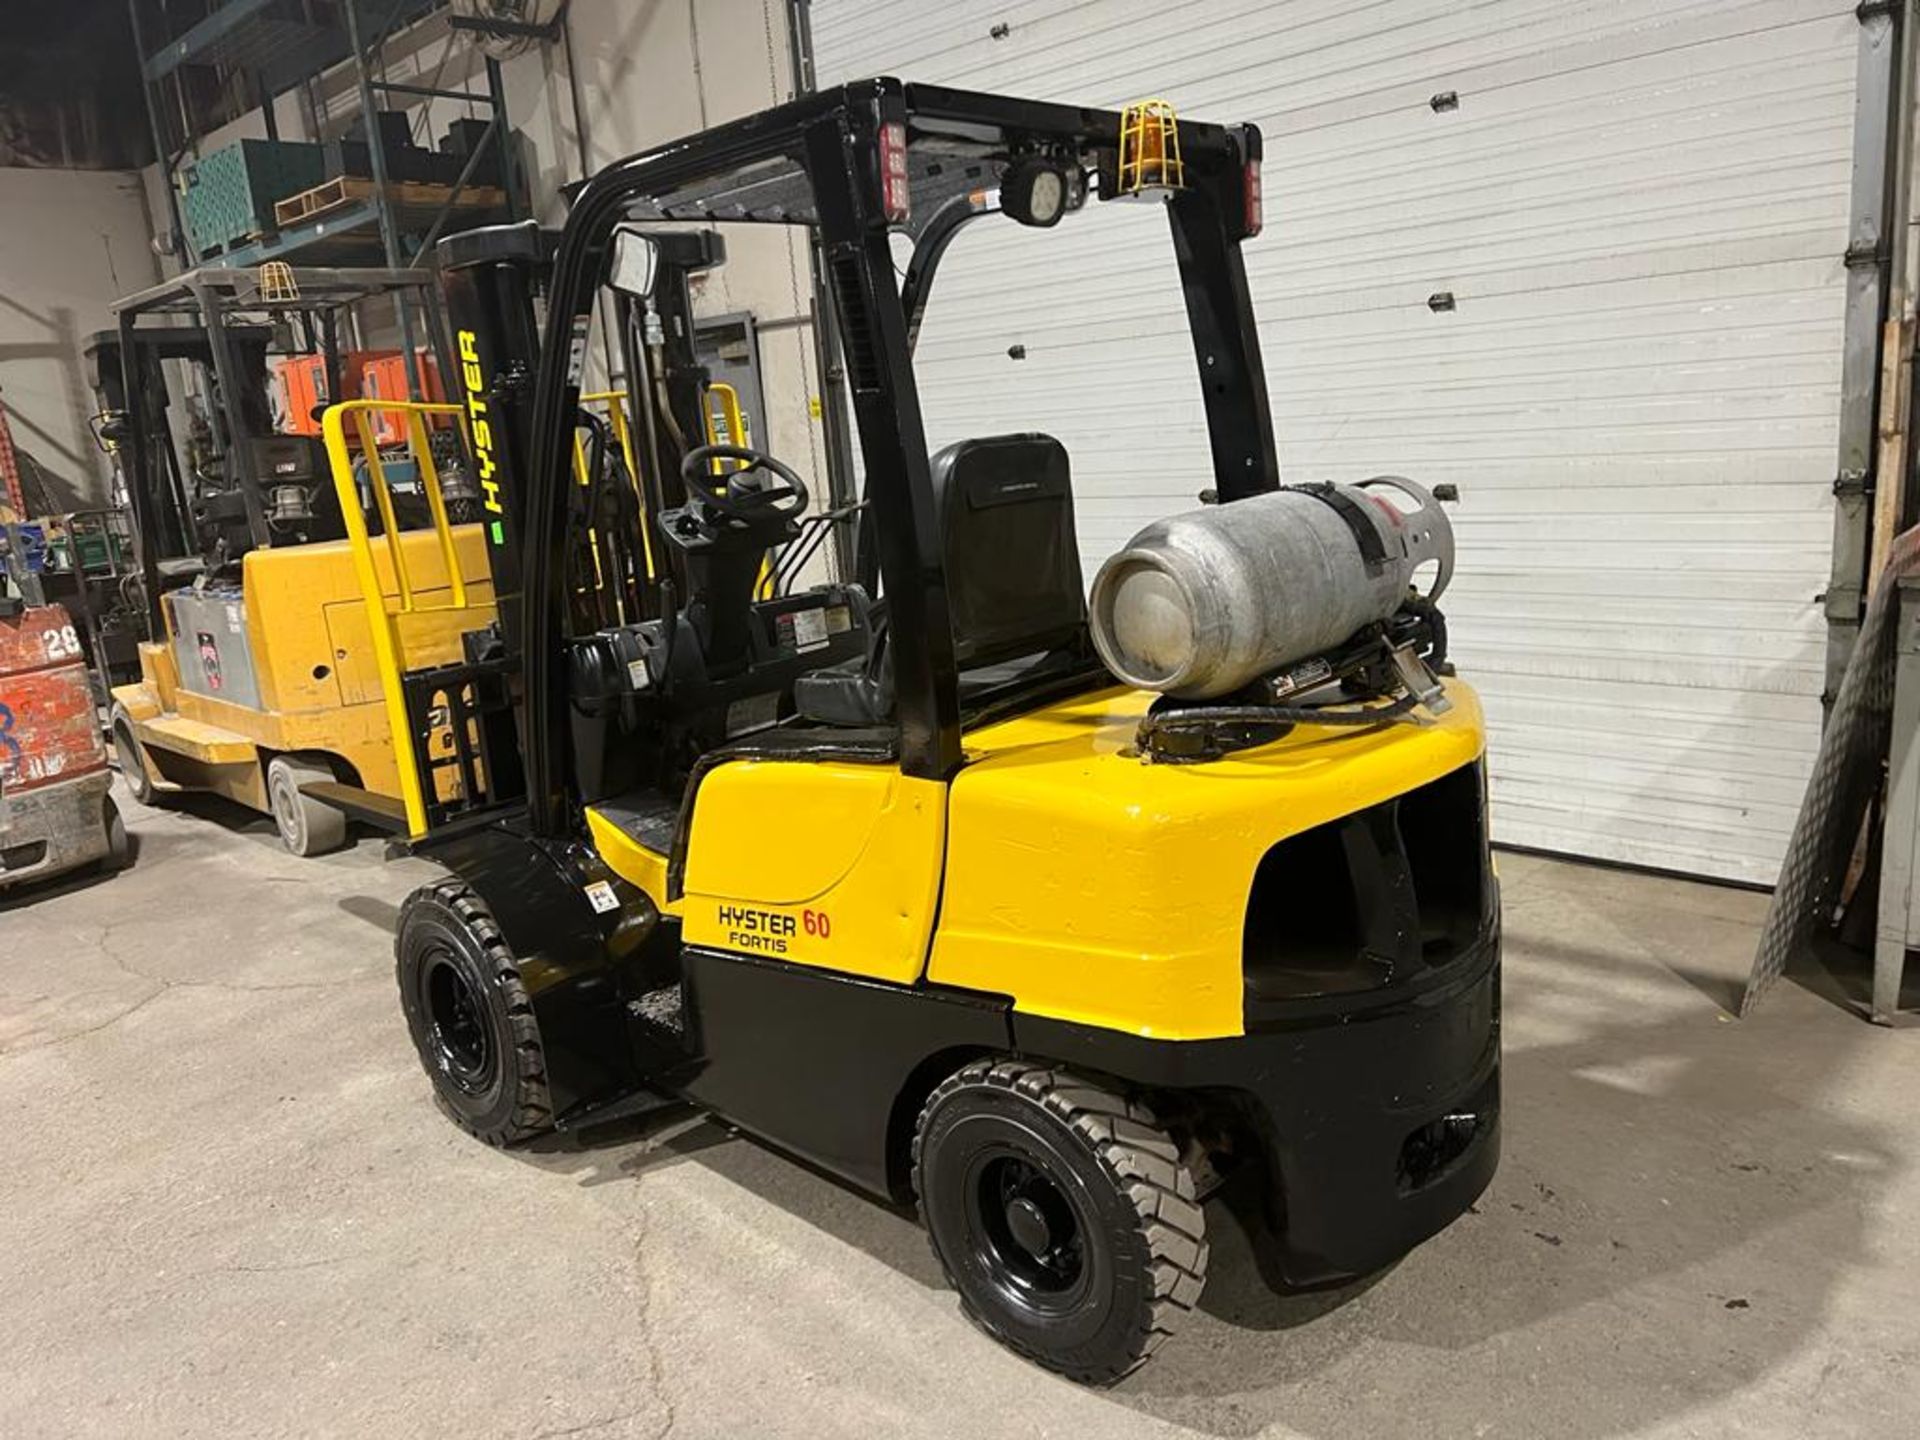 NICE 2011 Hyster 60 - 6,000lbs Capacity OUTDOOR Forklift DUAL FRONT TIRES LPG (propane) 60" forks - Image 2 of 5